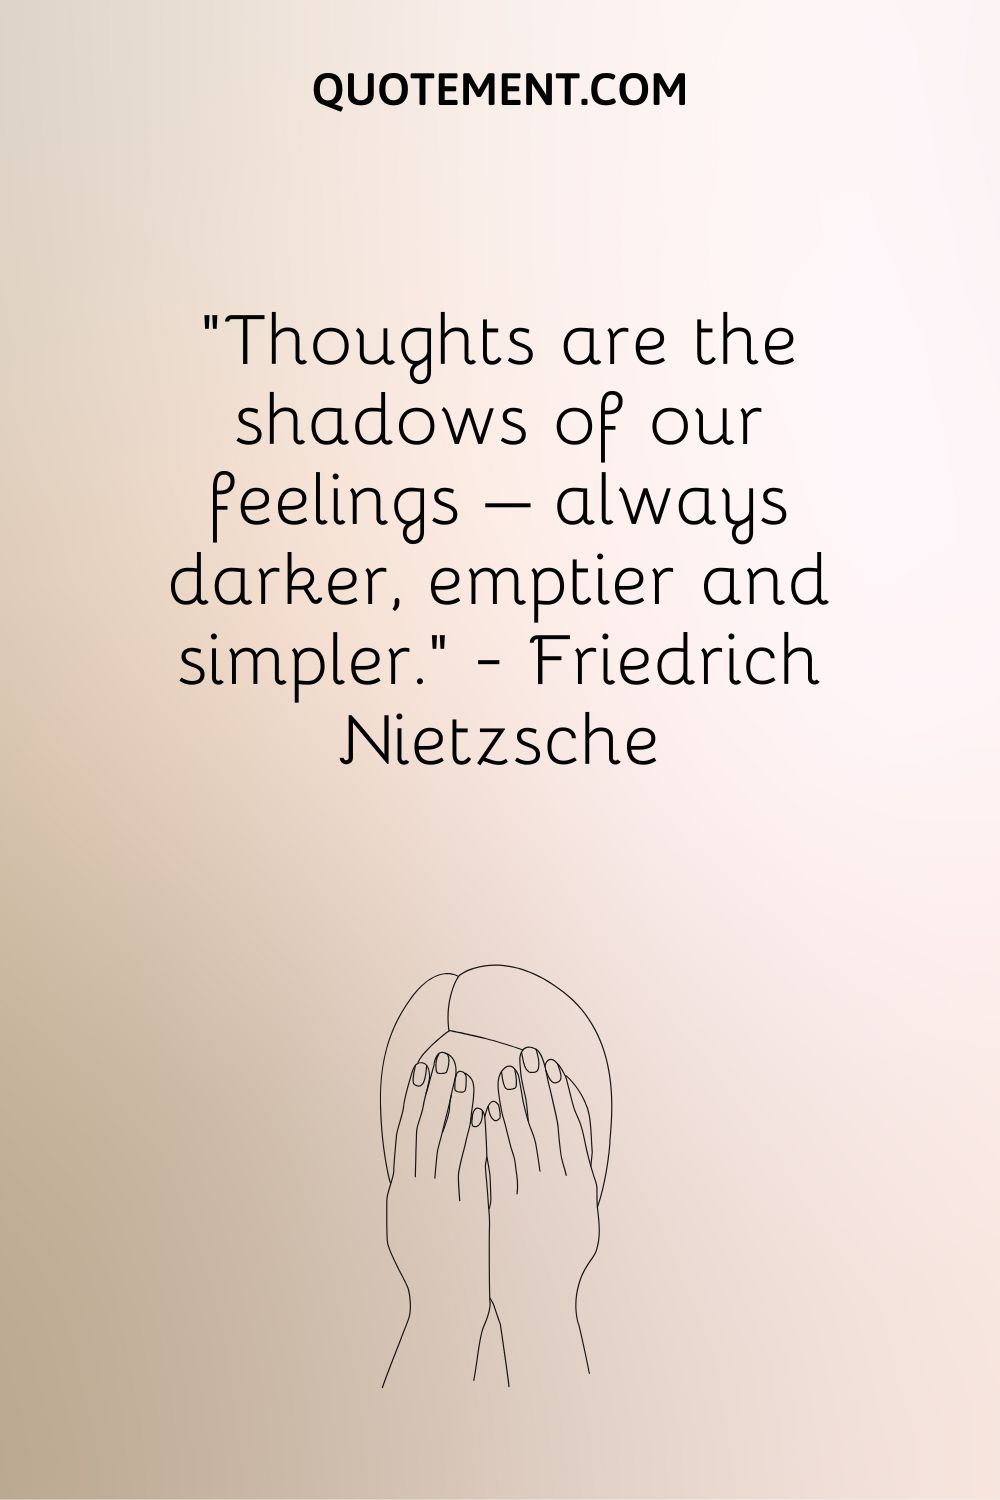 Thoughts are the shadows of our feelings – always darker, emptier and simpler.